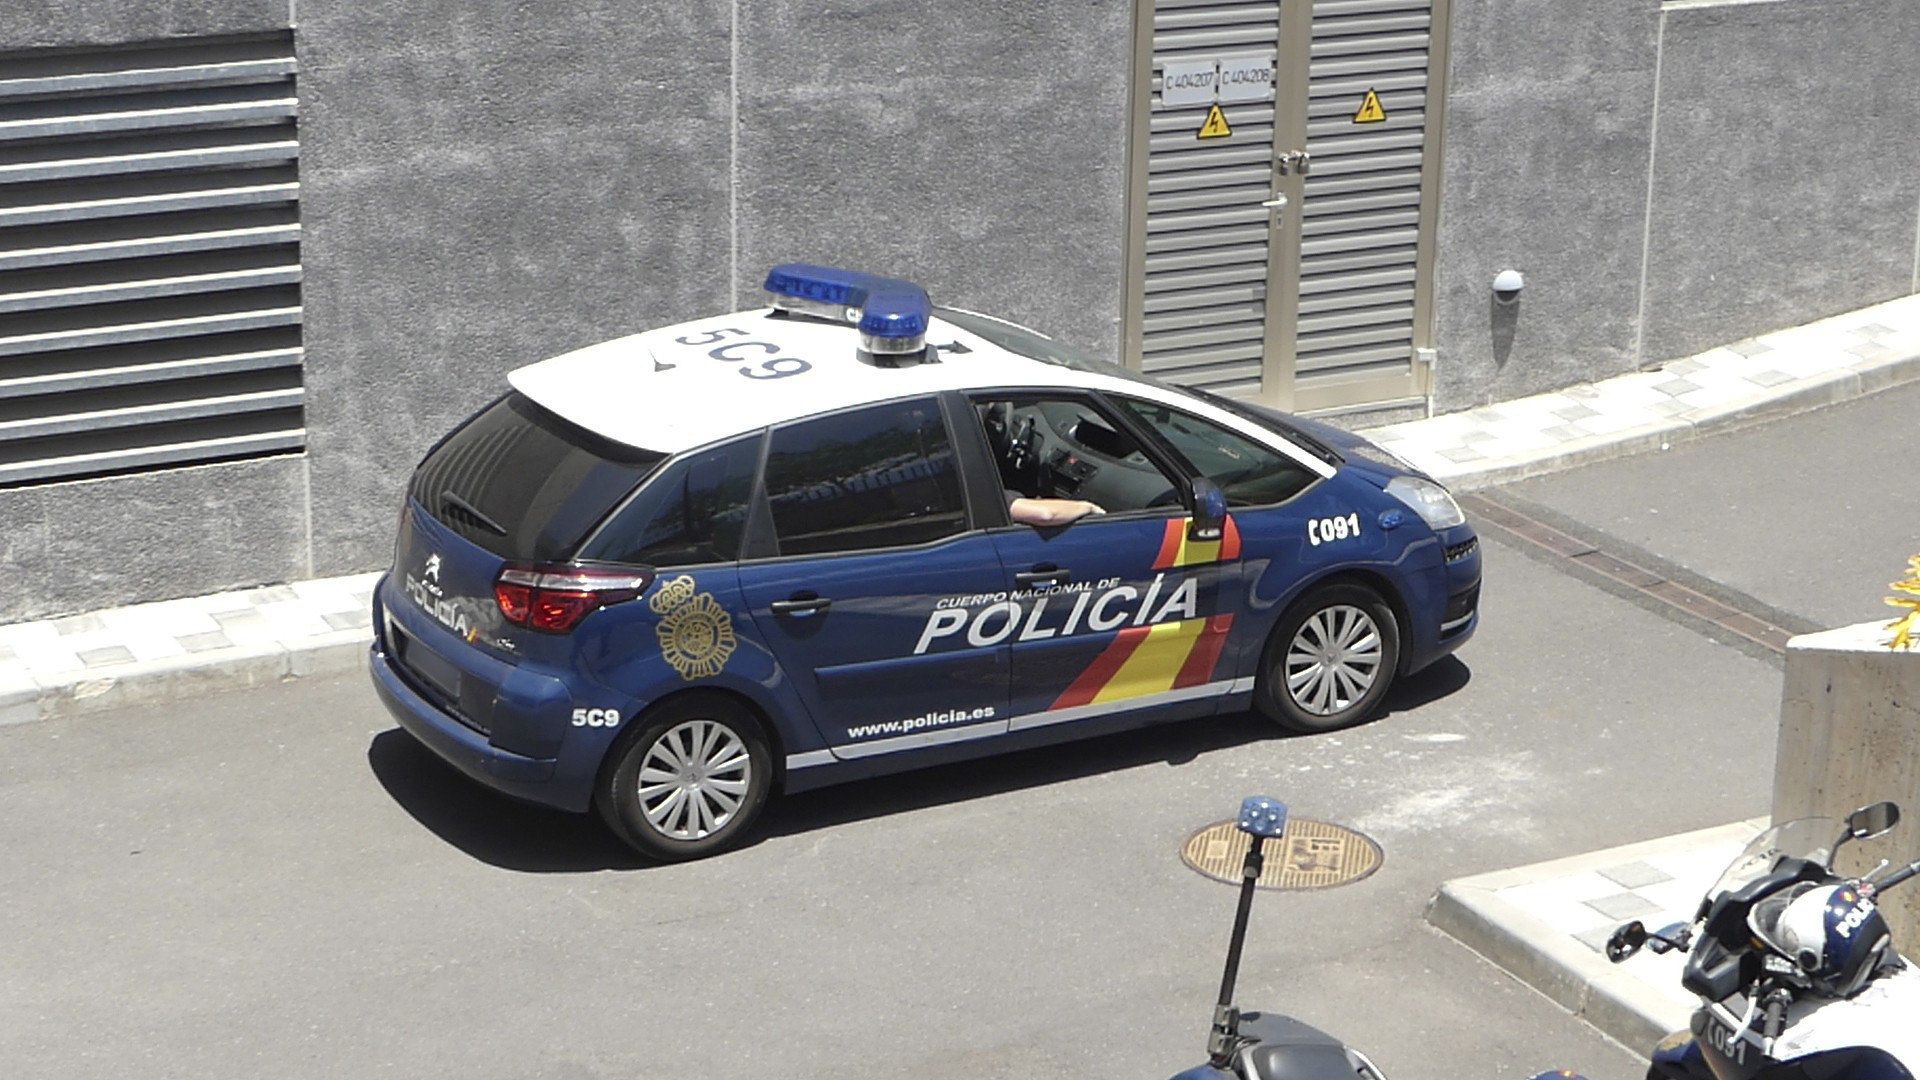 20 national police burst into a school in Barcelona to stop voting